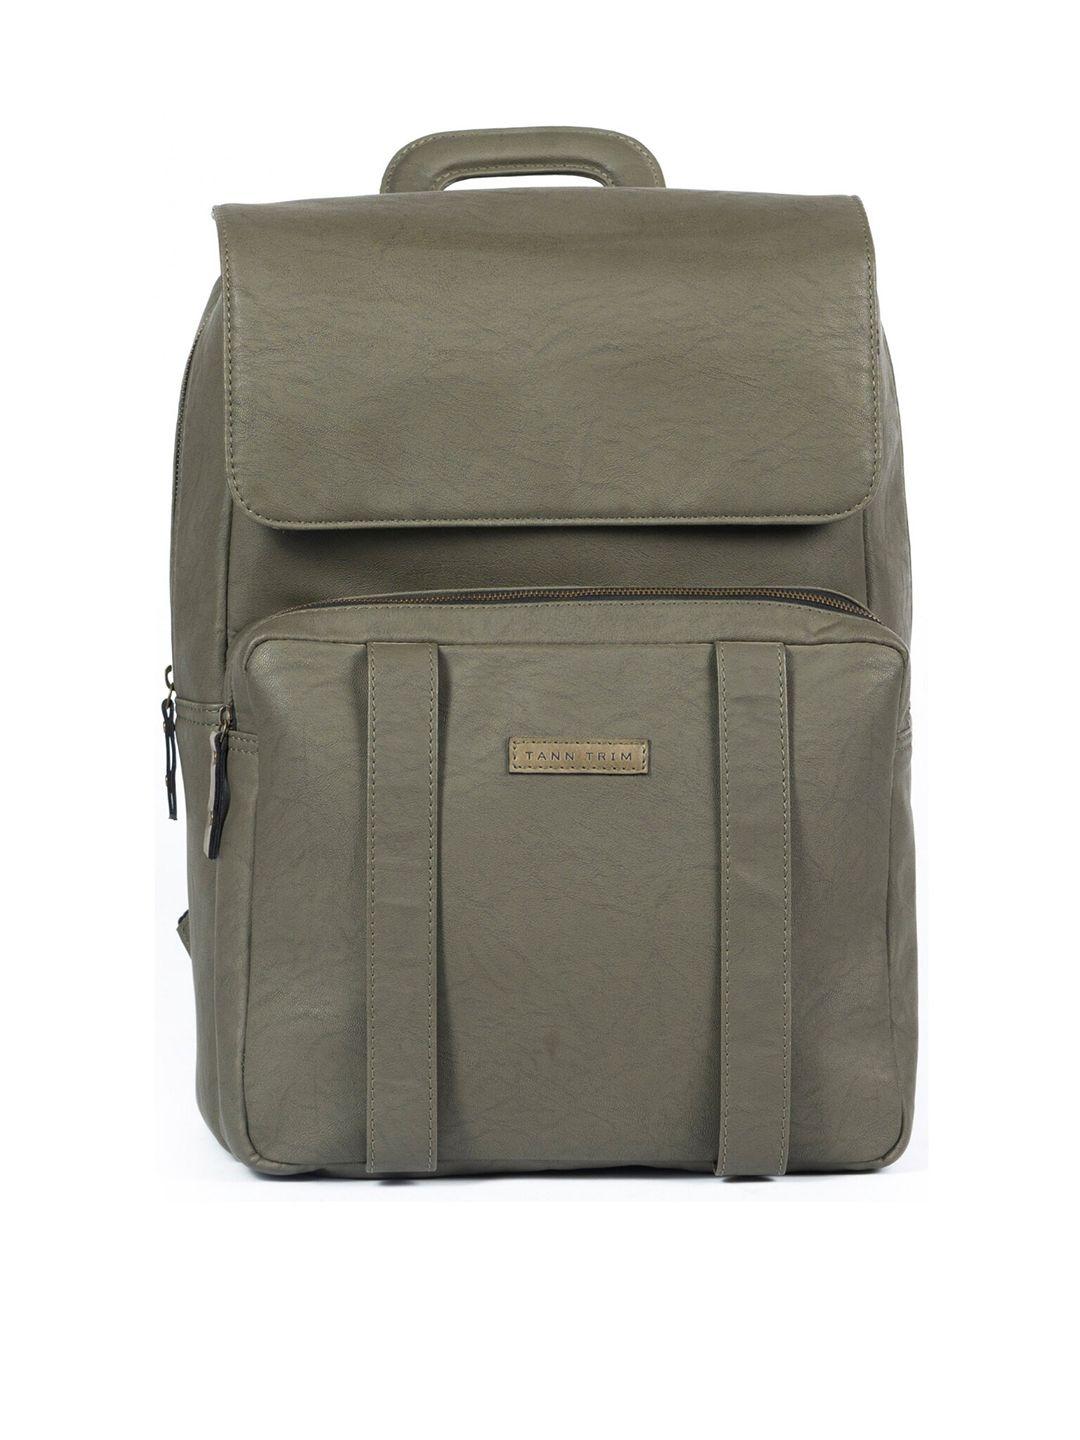 tann trim the metro mover backpack